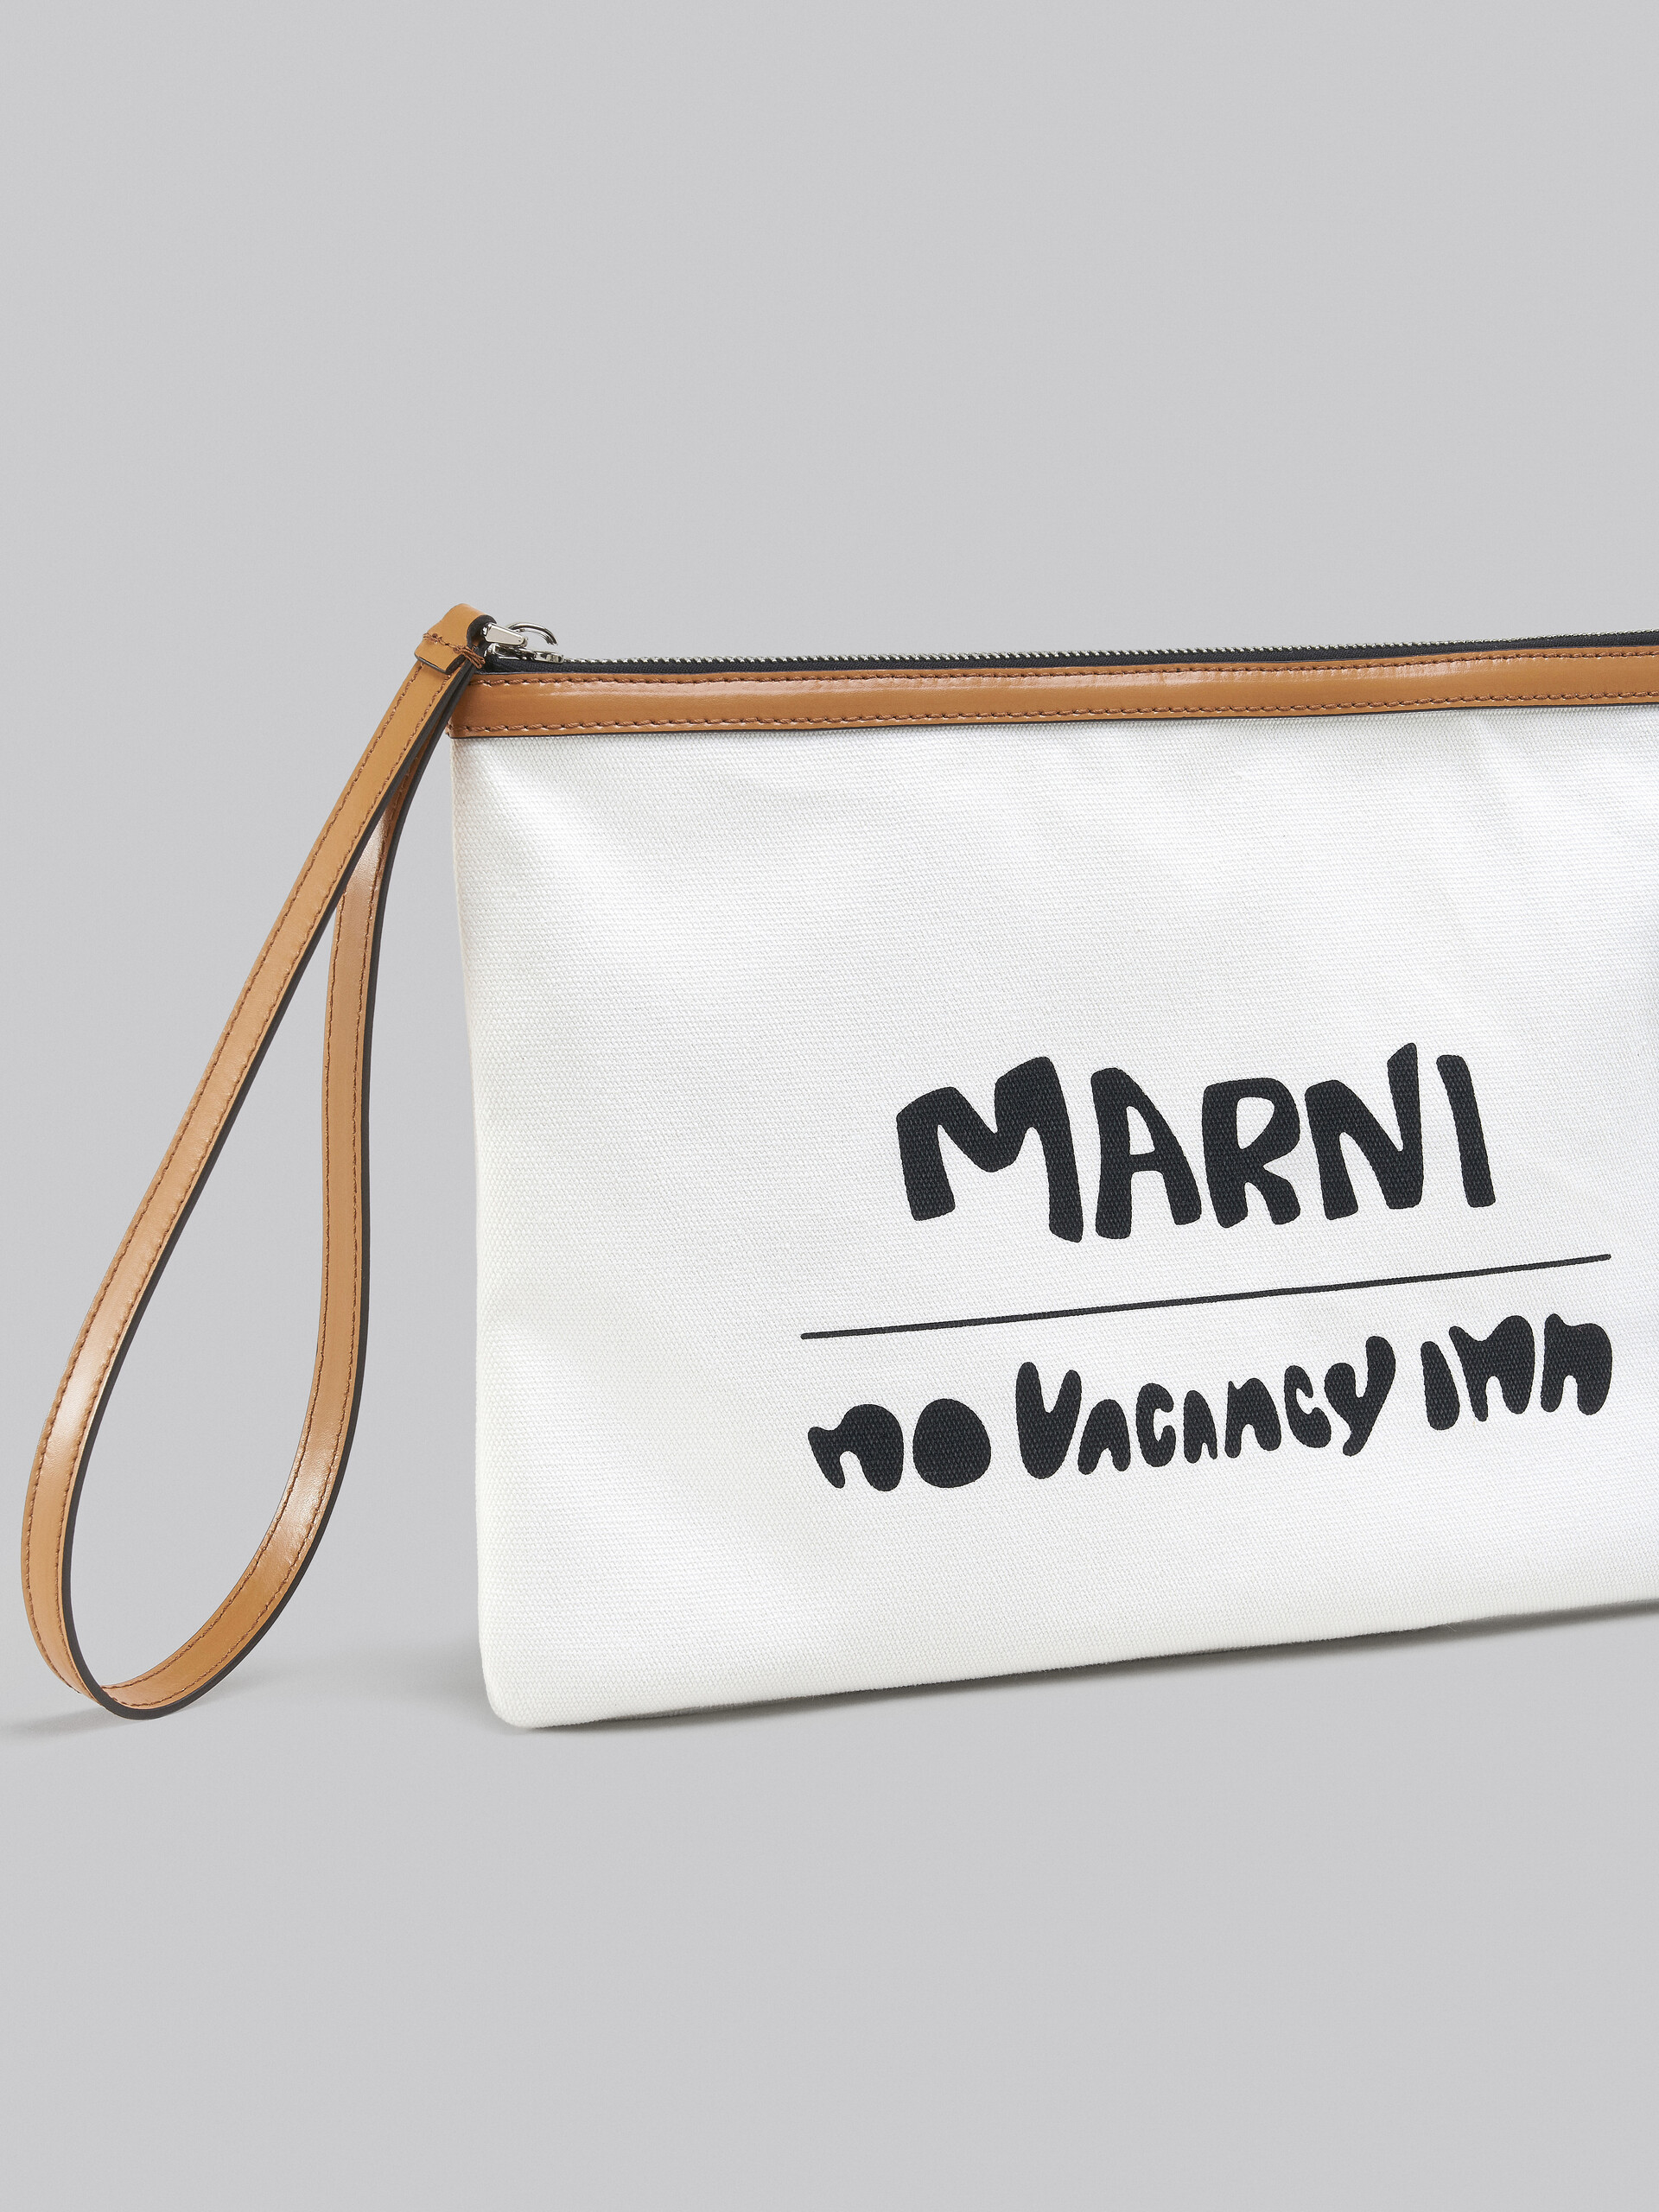 Marni x No Vacancy Inn - Bey Pouch in white canvas with beige trims - Pochette - Image 5